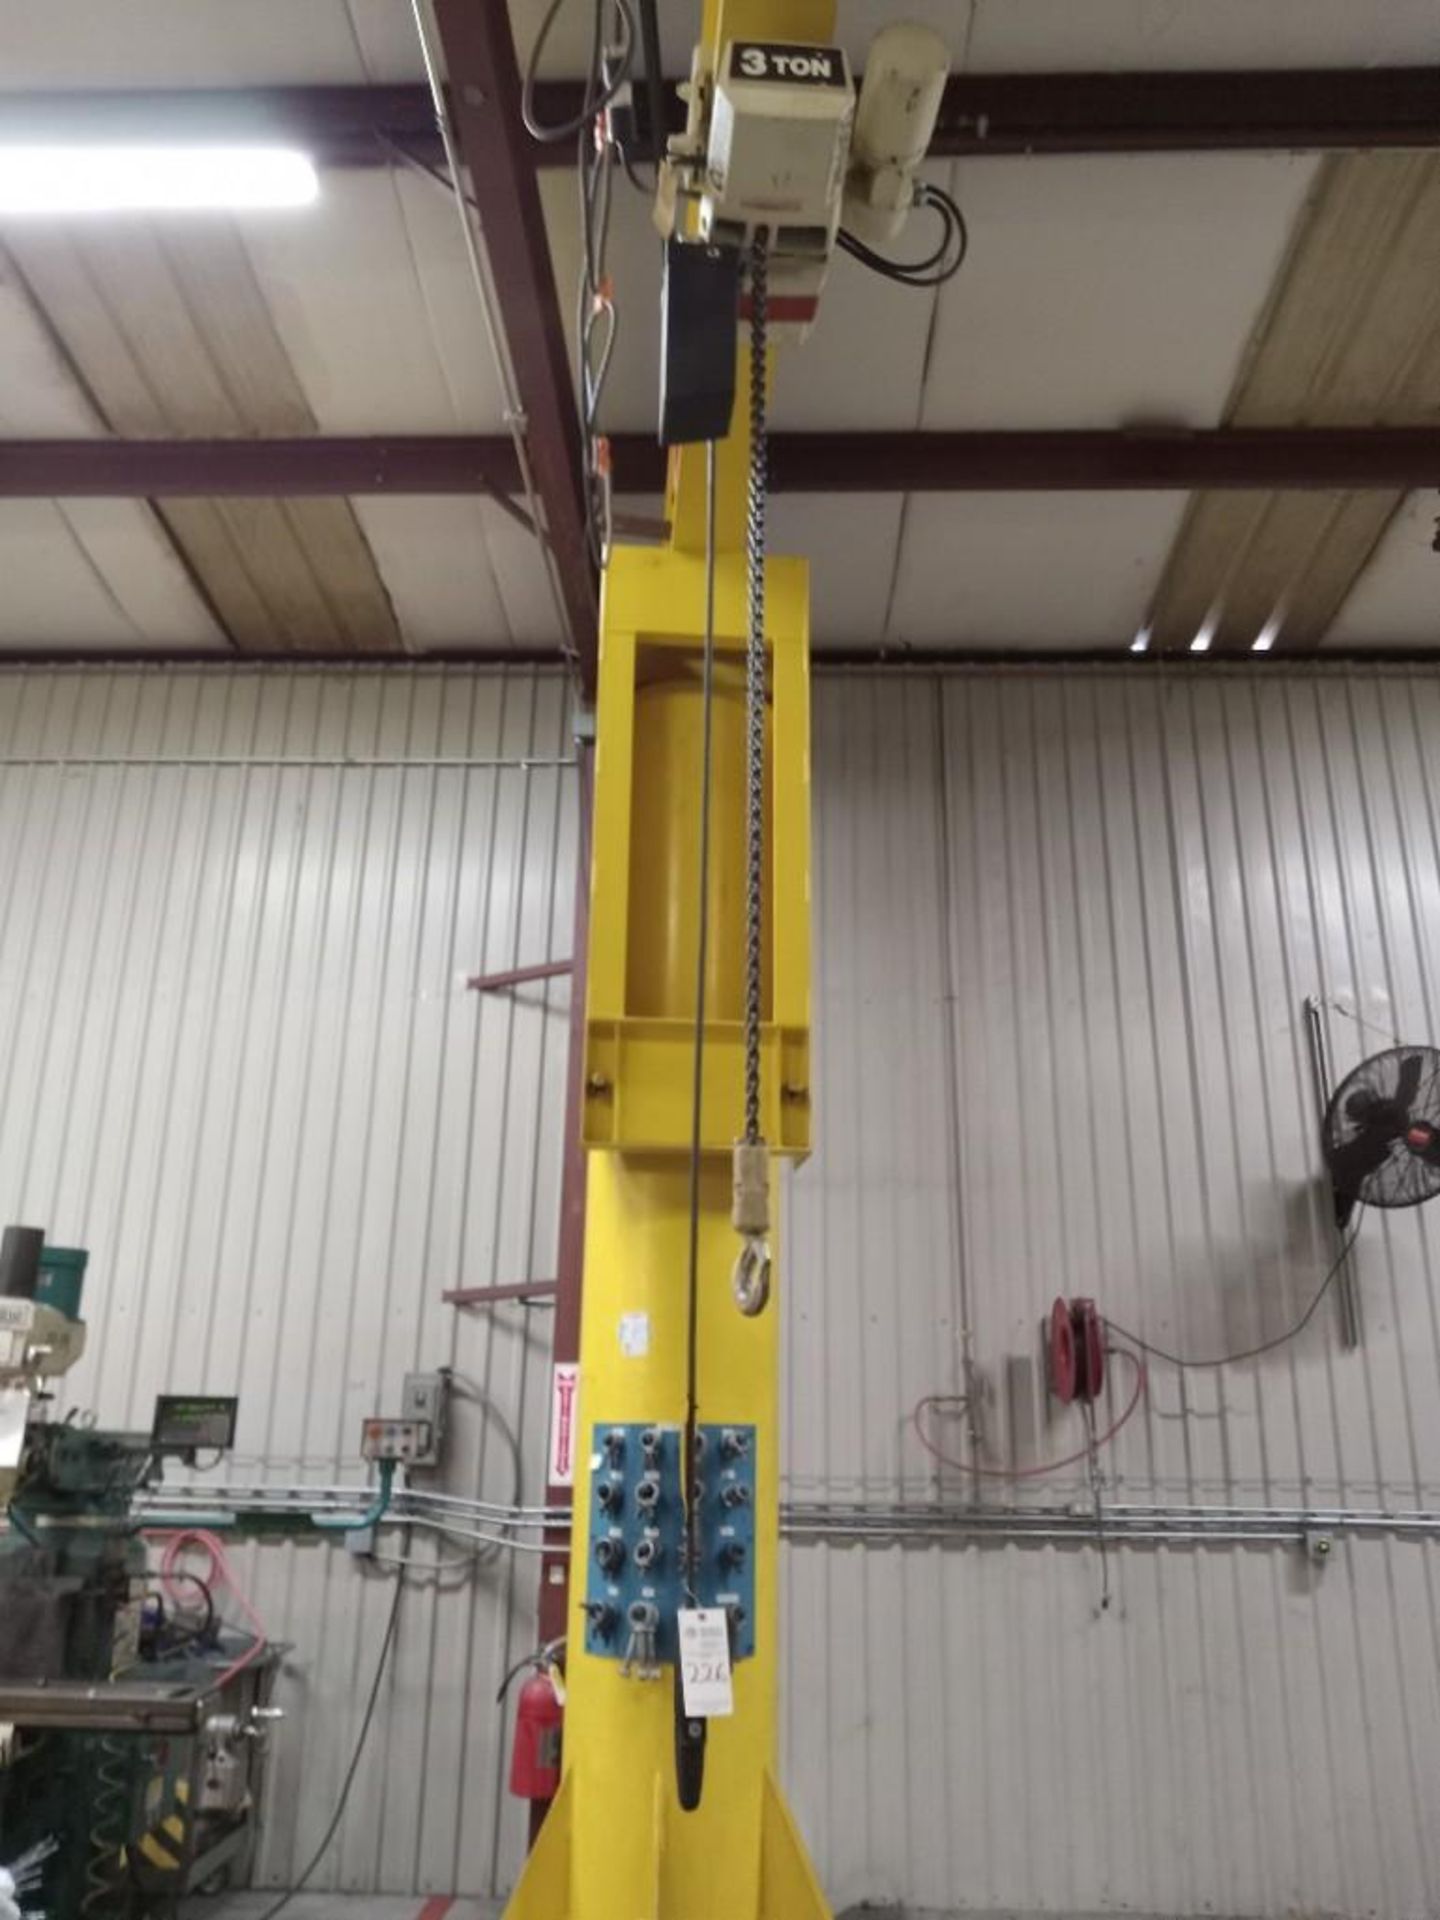 GORBEL 3 TON CRANE AND COFFING ELECTRIC CHAIN HOIST - Image 9 of 12